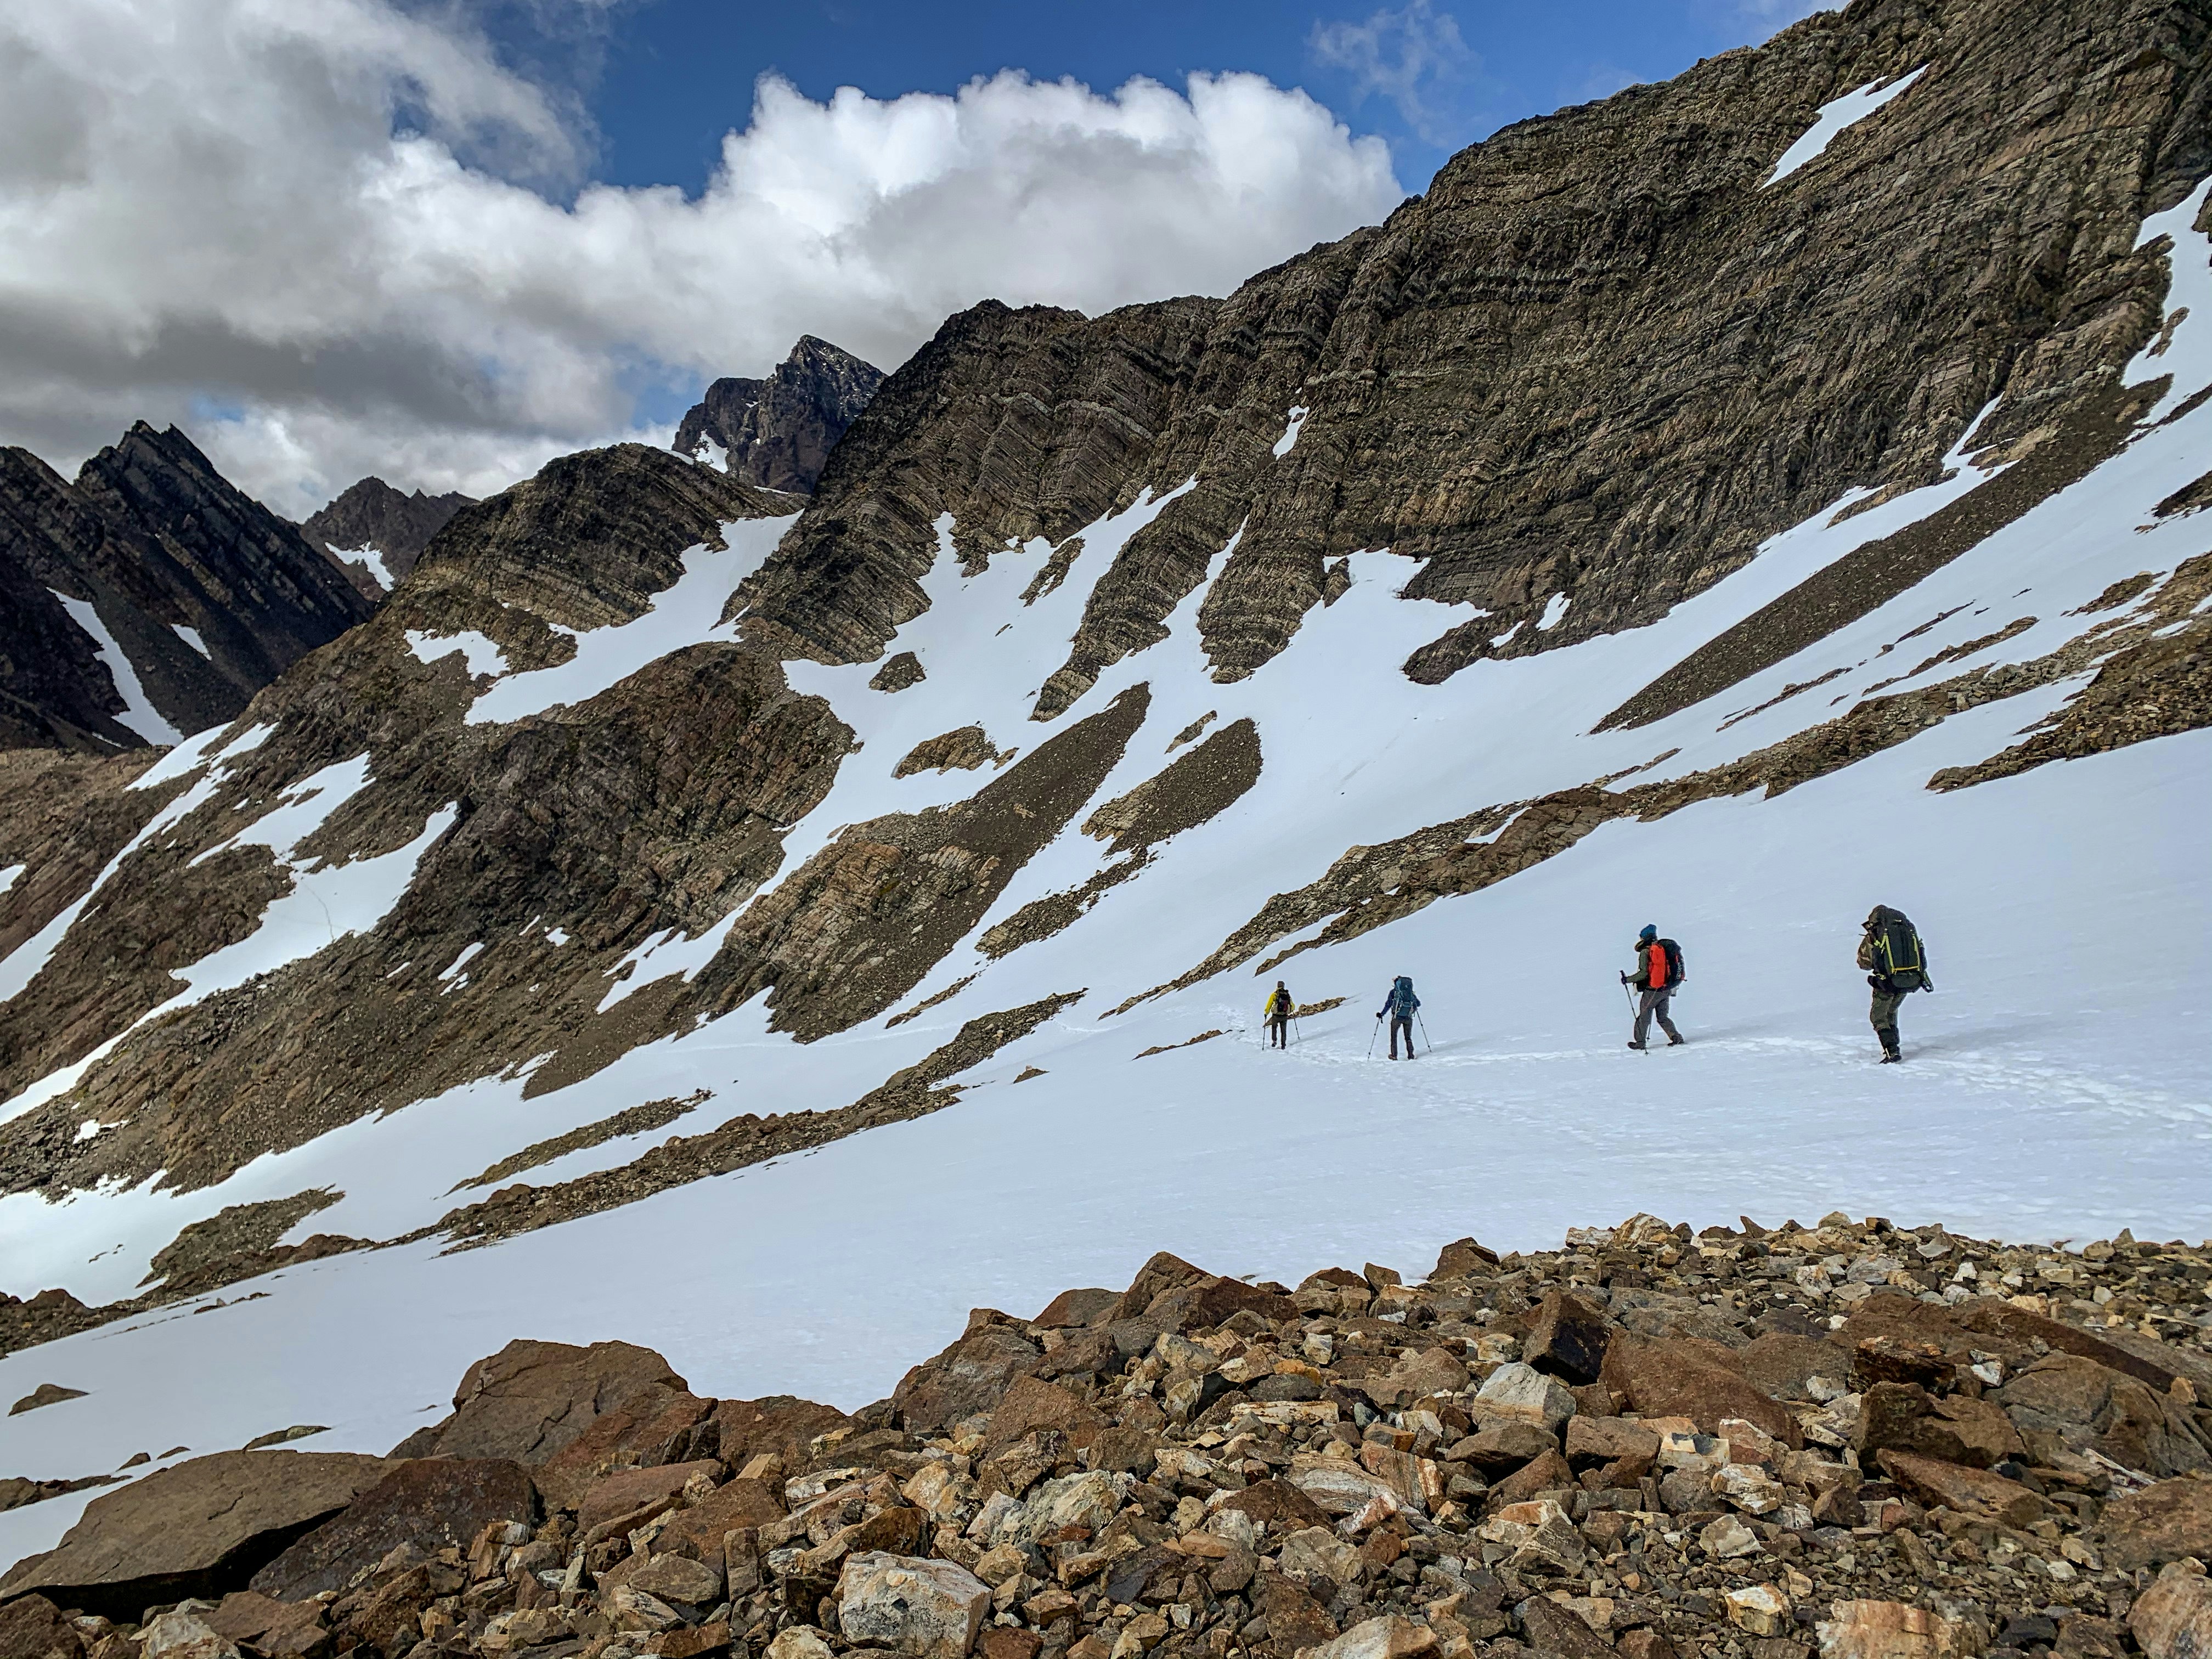 Four hikers with large backpacks trek across a snowy pass, with rocky peaks rising up the their right.